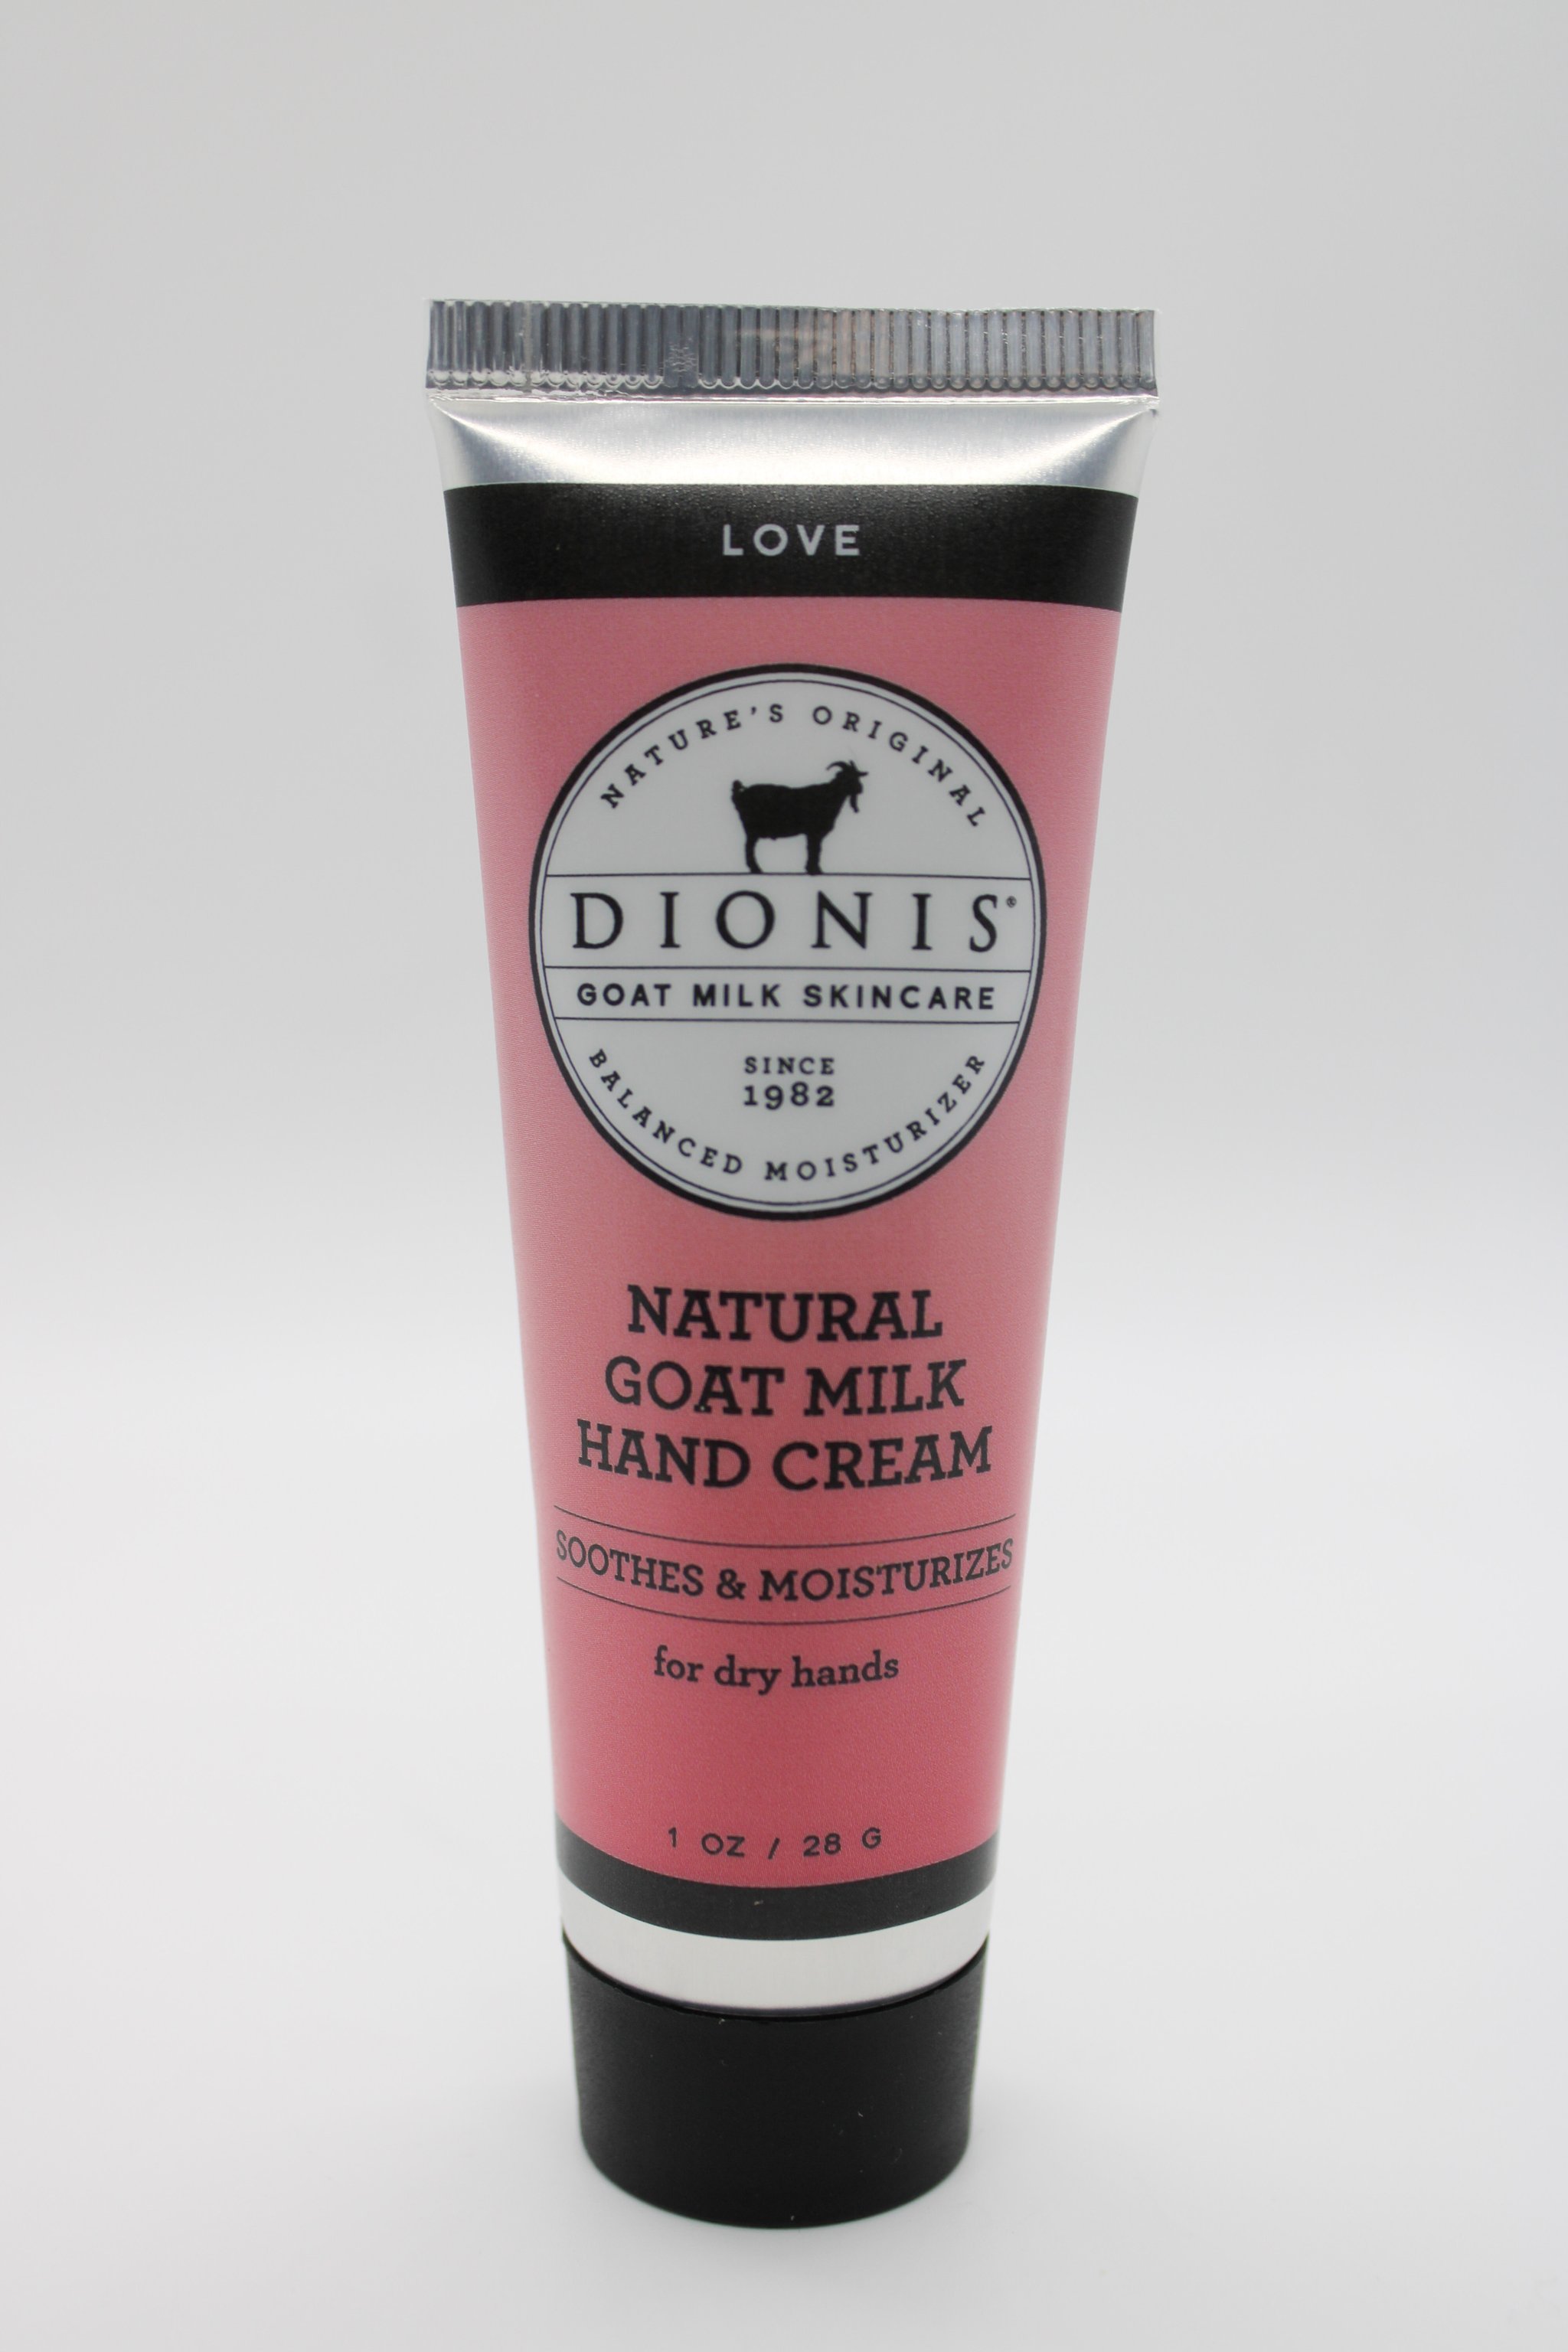 Mini Dionis Hand Creams (Other Scents Available)